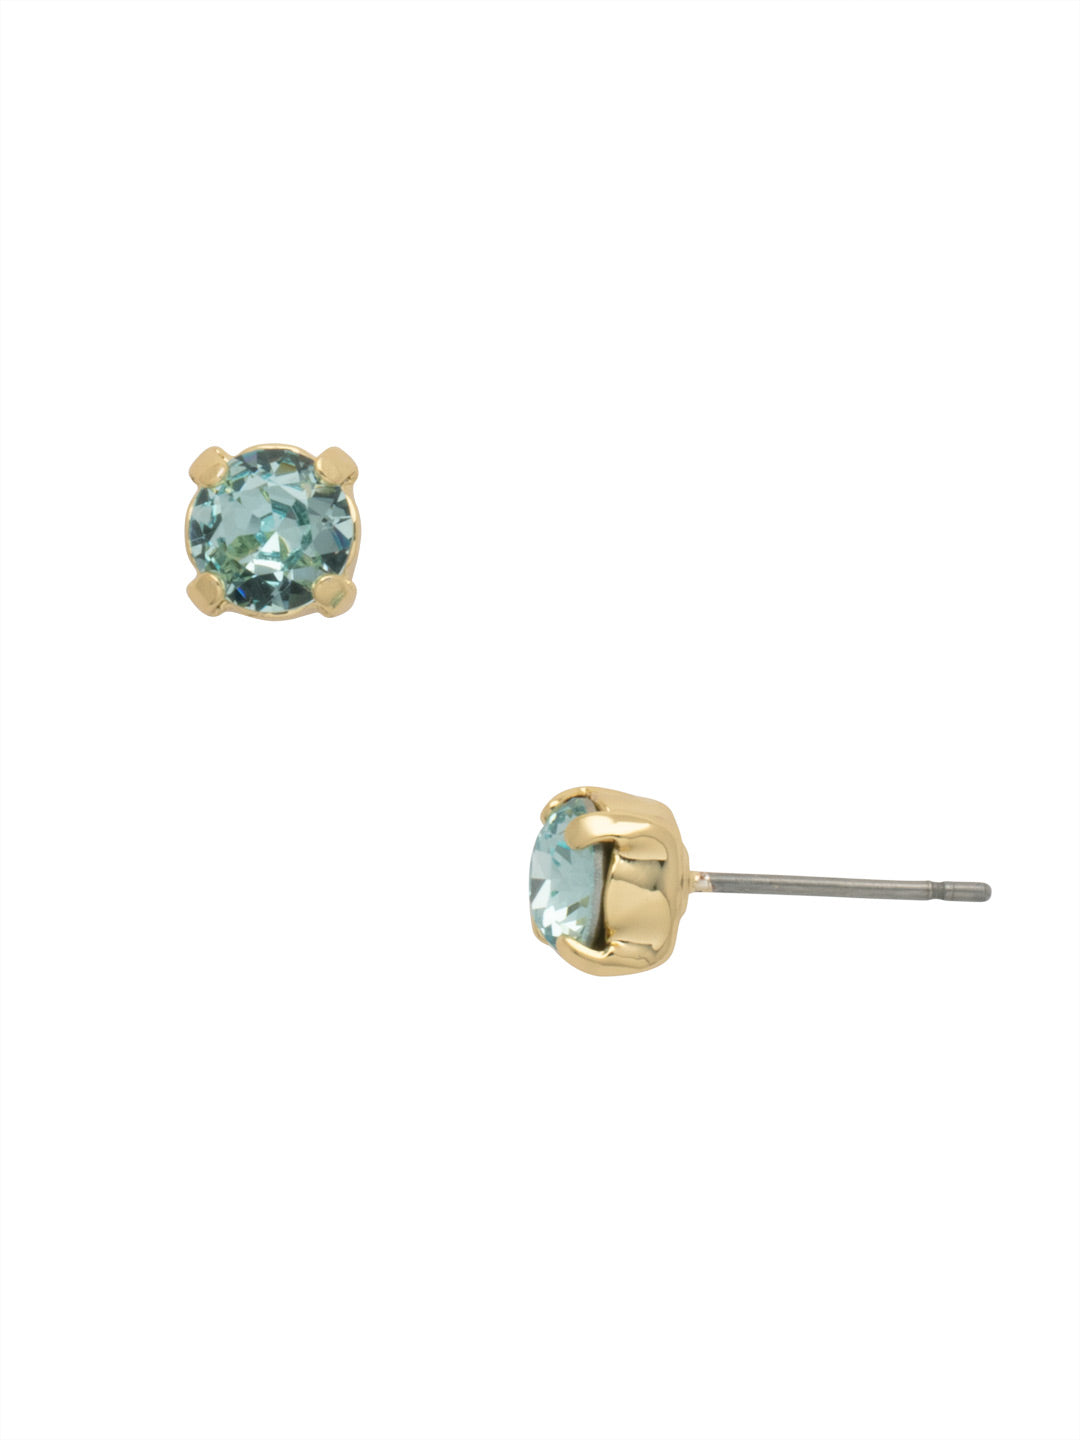 Jayda Stud Earrings - EDN32BGAQU - <p>The Jayda Stud Earrings are the perfect every day wardrobe staple. A round crystal nestles perfectly in a metal plated post with four prongs. </p><p>Need help picking a stud? <a href="https://www.sorrelli.com/blogs/sisterhood/round-stud-earrings-101-a-rundown-of-sizes-styles-and-sparkle">Check out our size guide!</a> From Sorrelli's Aquamarine collection in our Bright Gold-tone finish.</p>